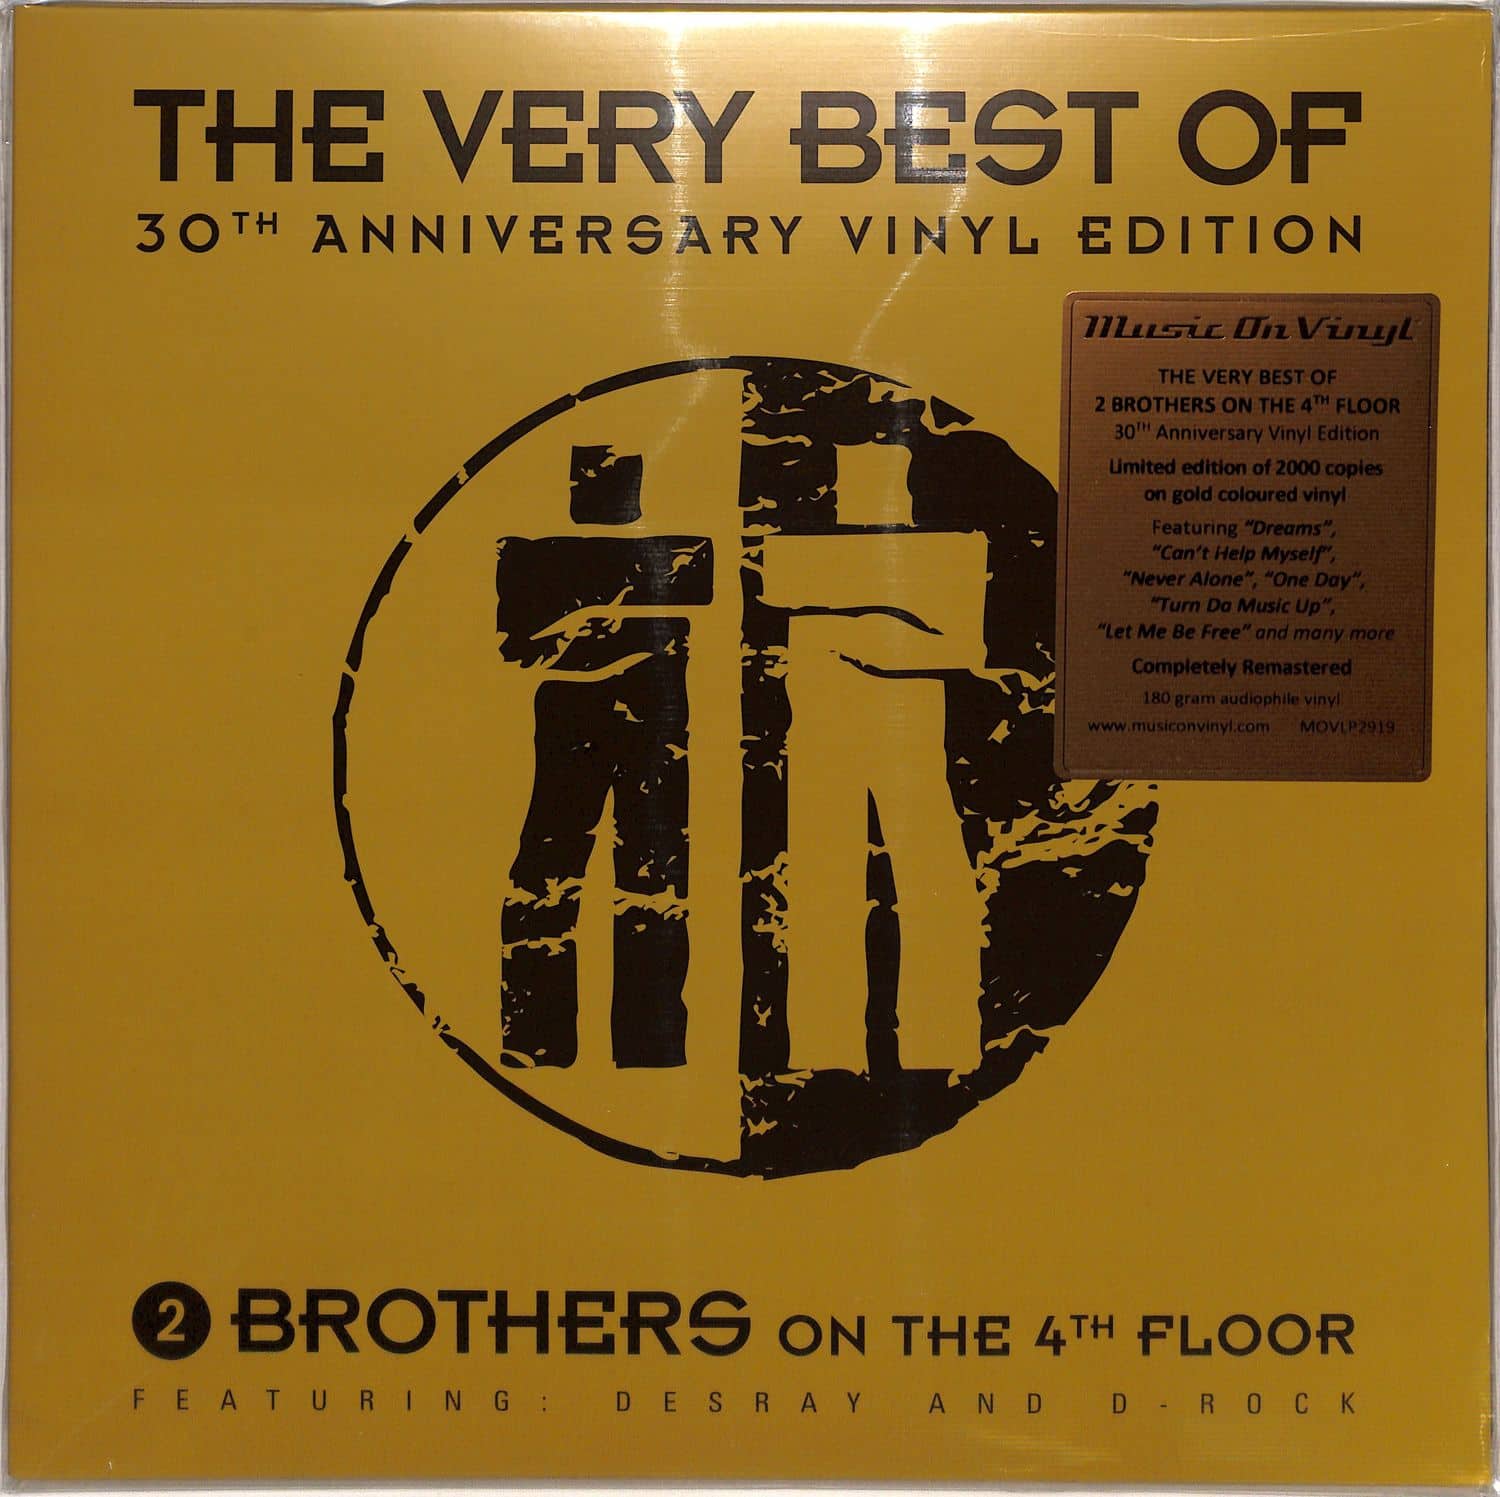 Two Brothers On The 4th Floor - VERY BEST OF 